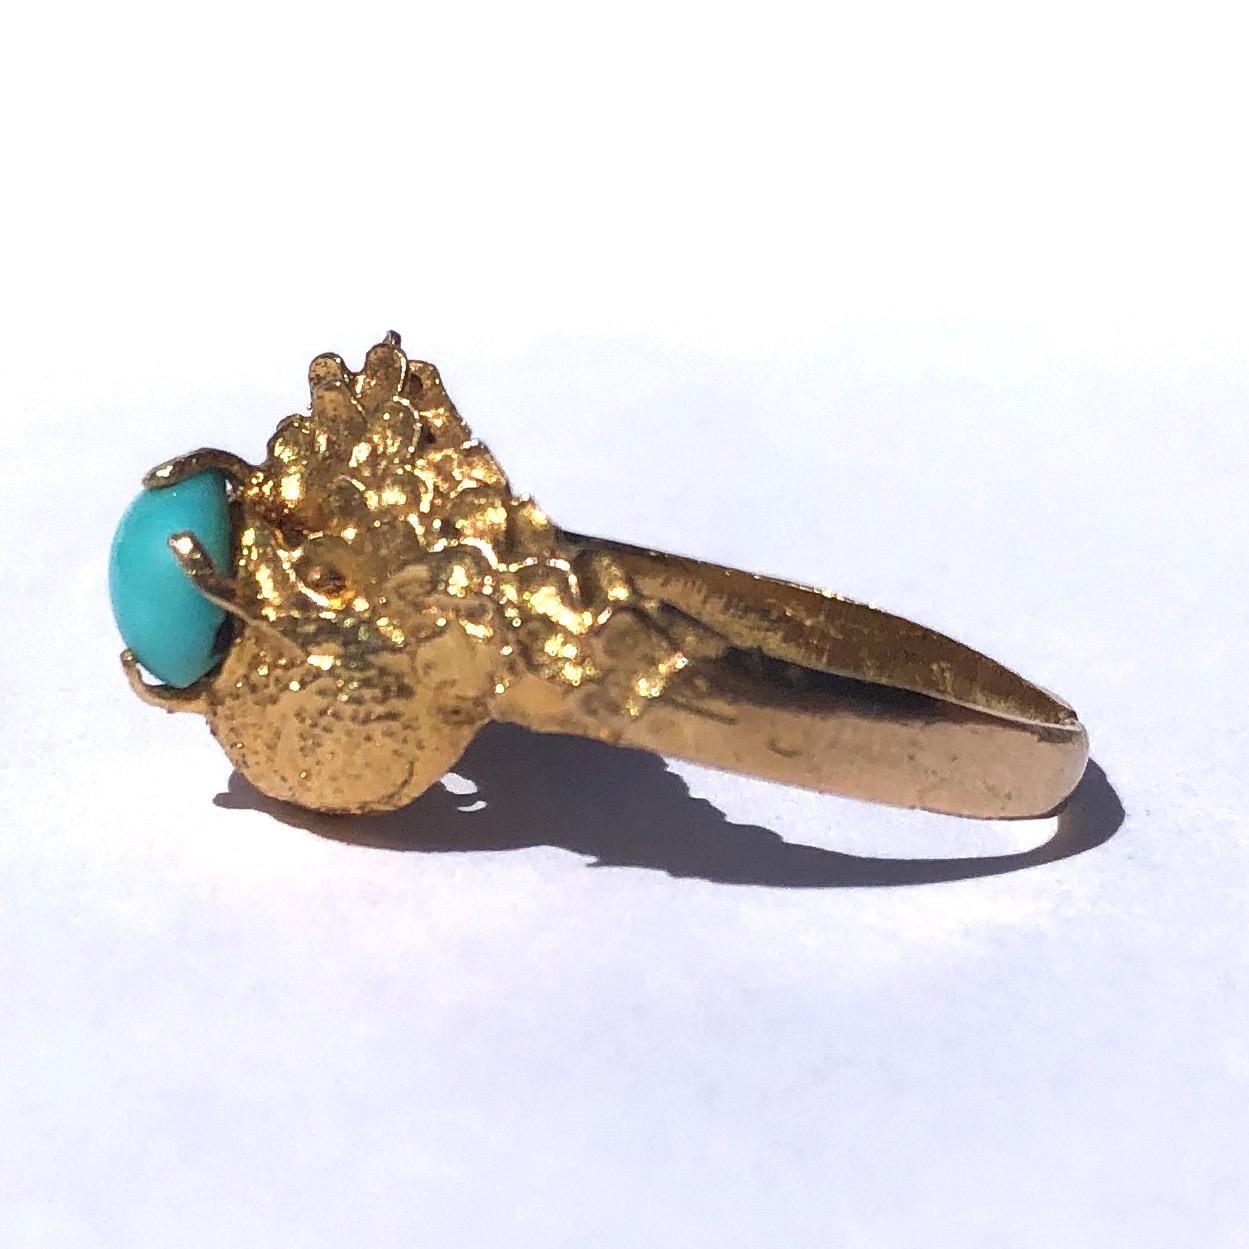 This turquoise ring has so much detail. The gold that's surrounds the stone is gorgeously textured, one texture looks like feathers and the other has a hammered effect with open work detail. 

Ring Size: N or 6 3/4
Widest Point: 12mm 
Height Off